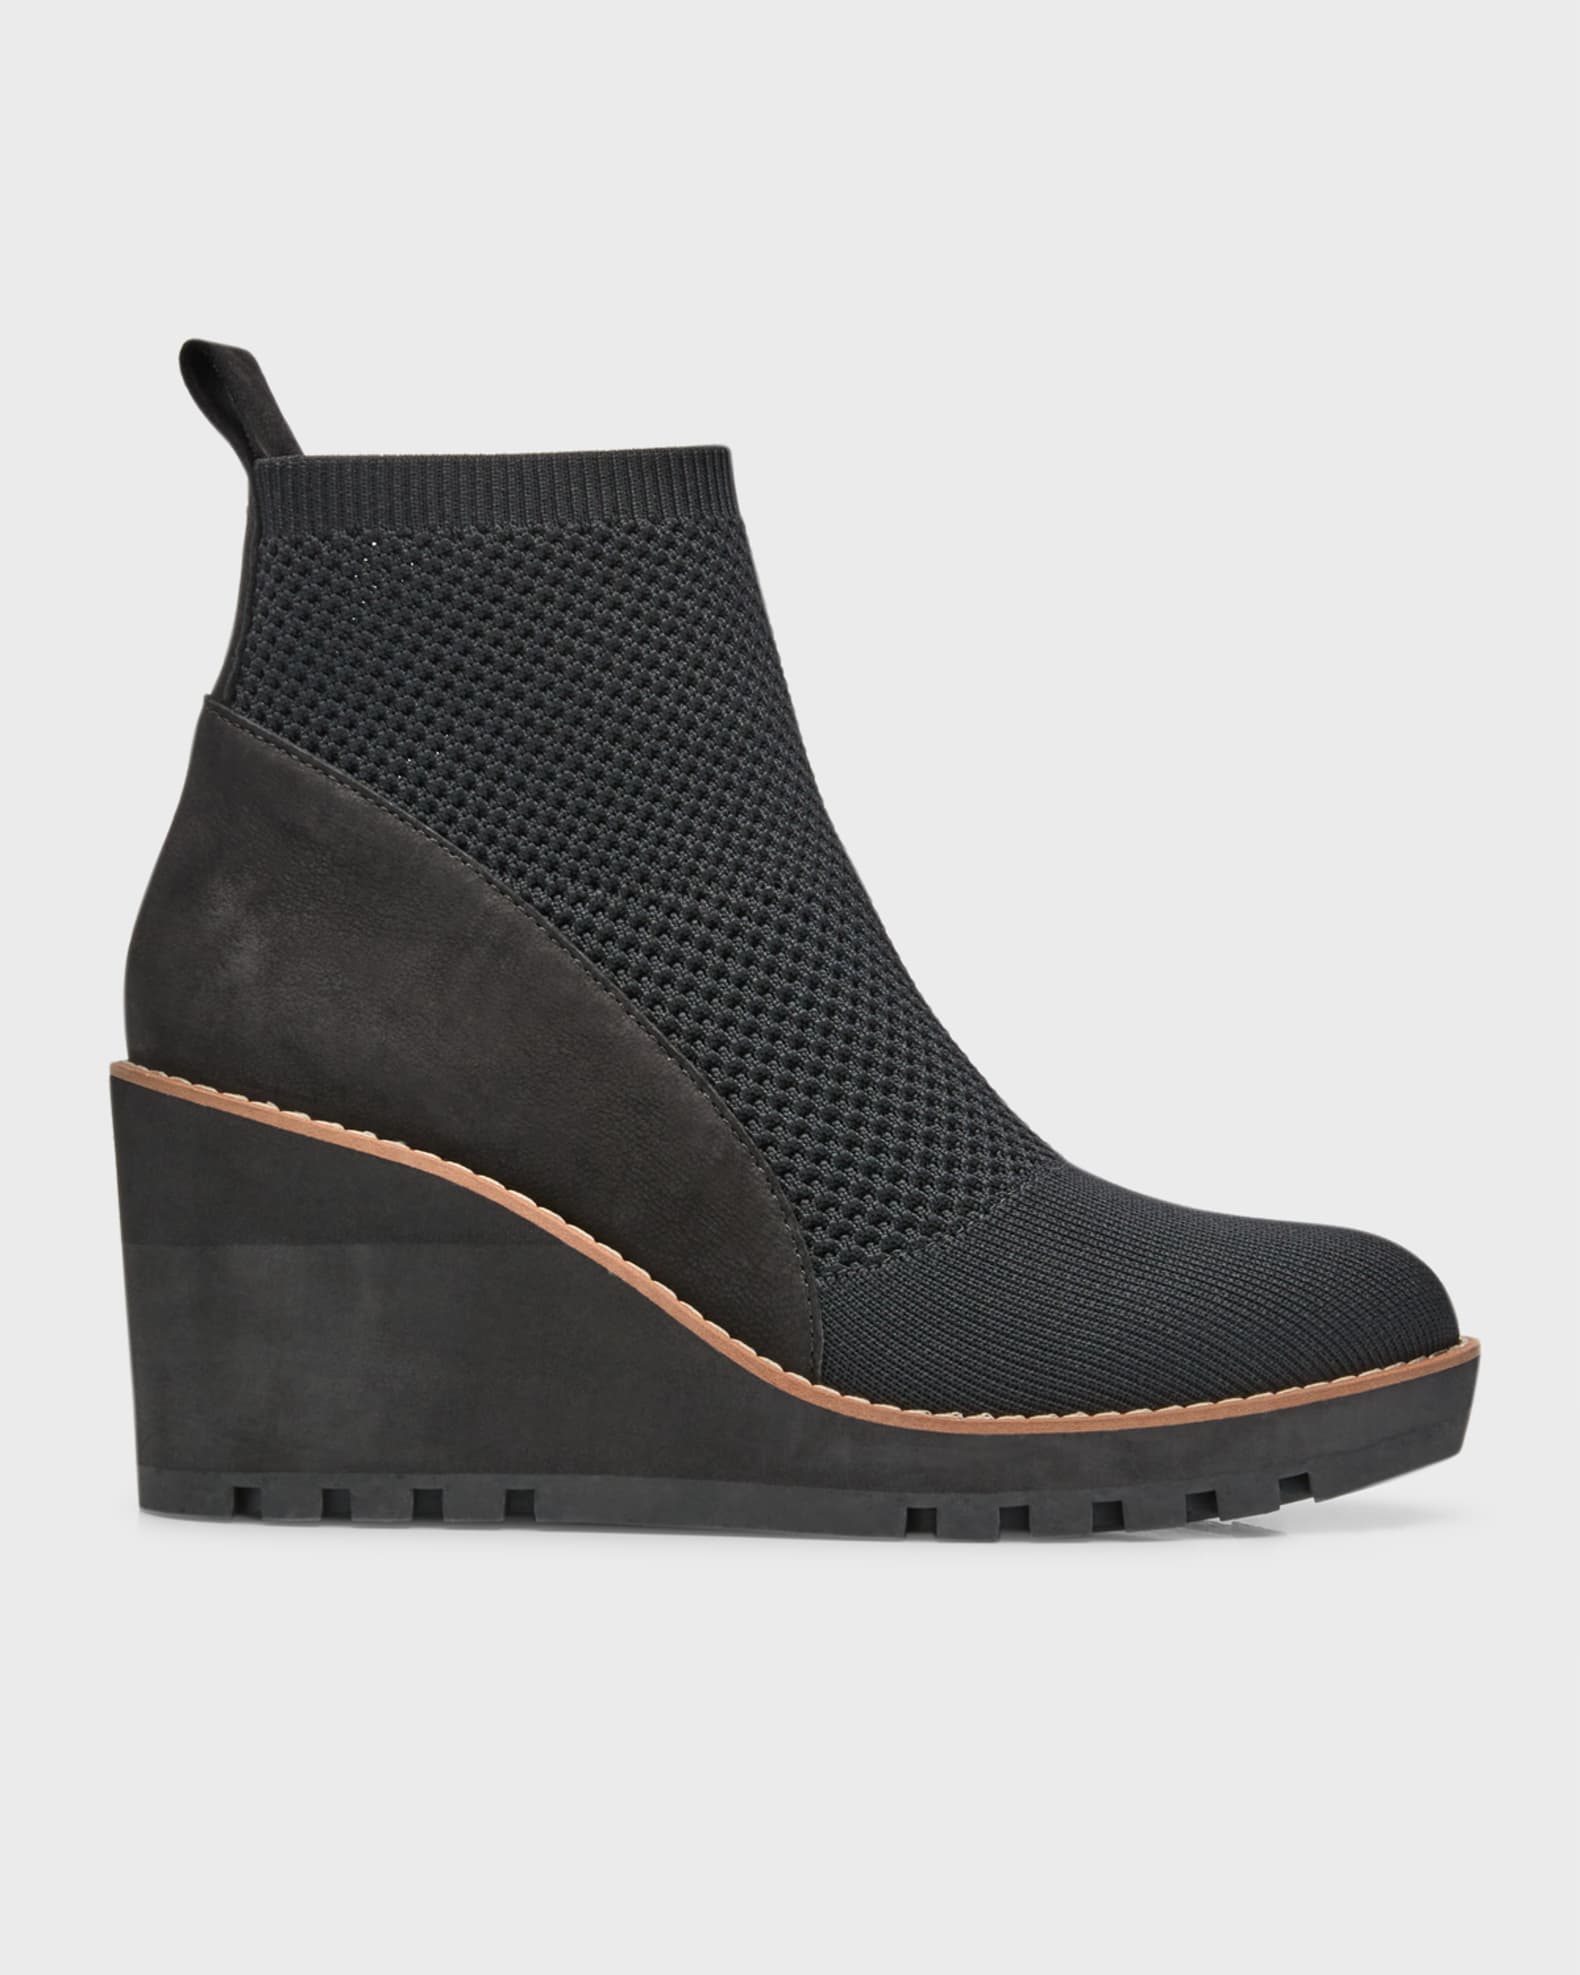 Eileen Fisher Quill Stretch Knit Wedge Booties | Neiman Marcus